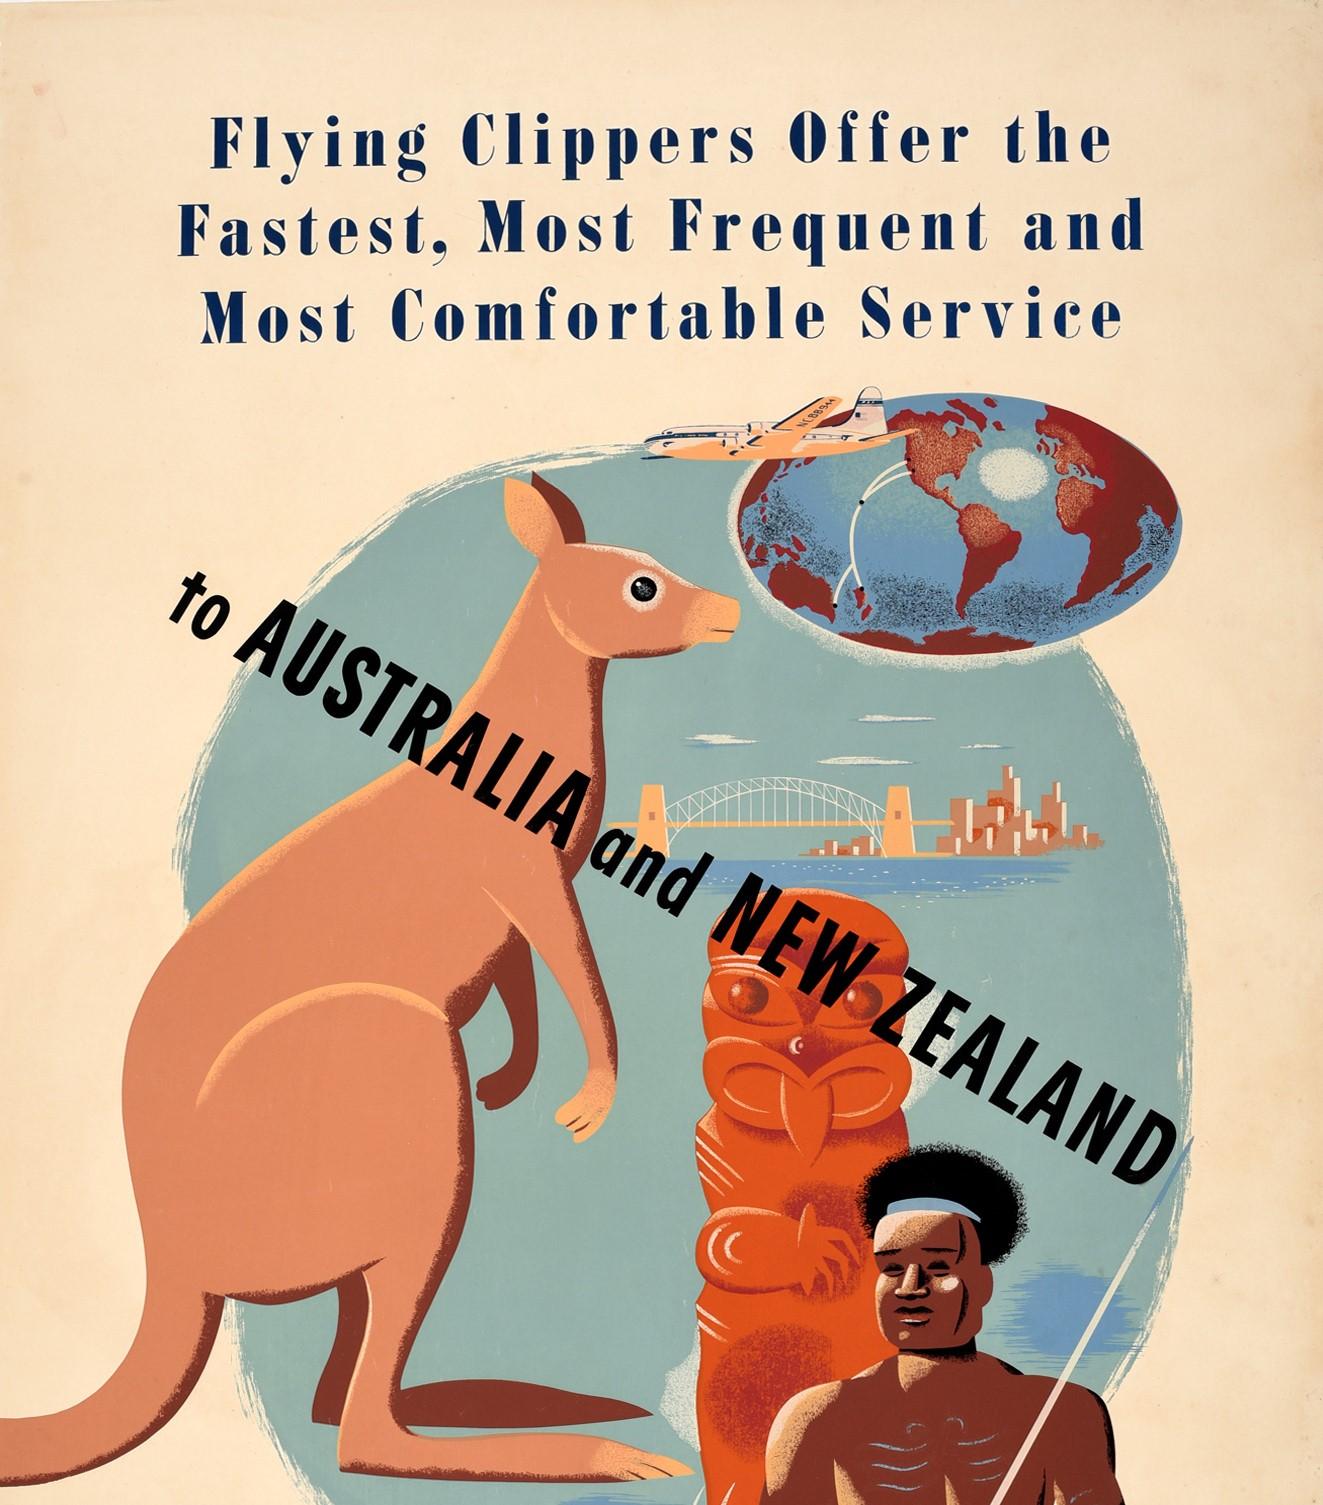 Original vintage Pan Am travel poster - to Australia and New Zealand PAA Pan American World Airways The World's Most Experienced Airline - featuring a great design by Jean Carlu (1900-1997) of a kangaroo and an aboriginal man next to a Pouwhenua /